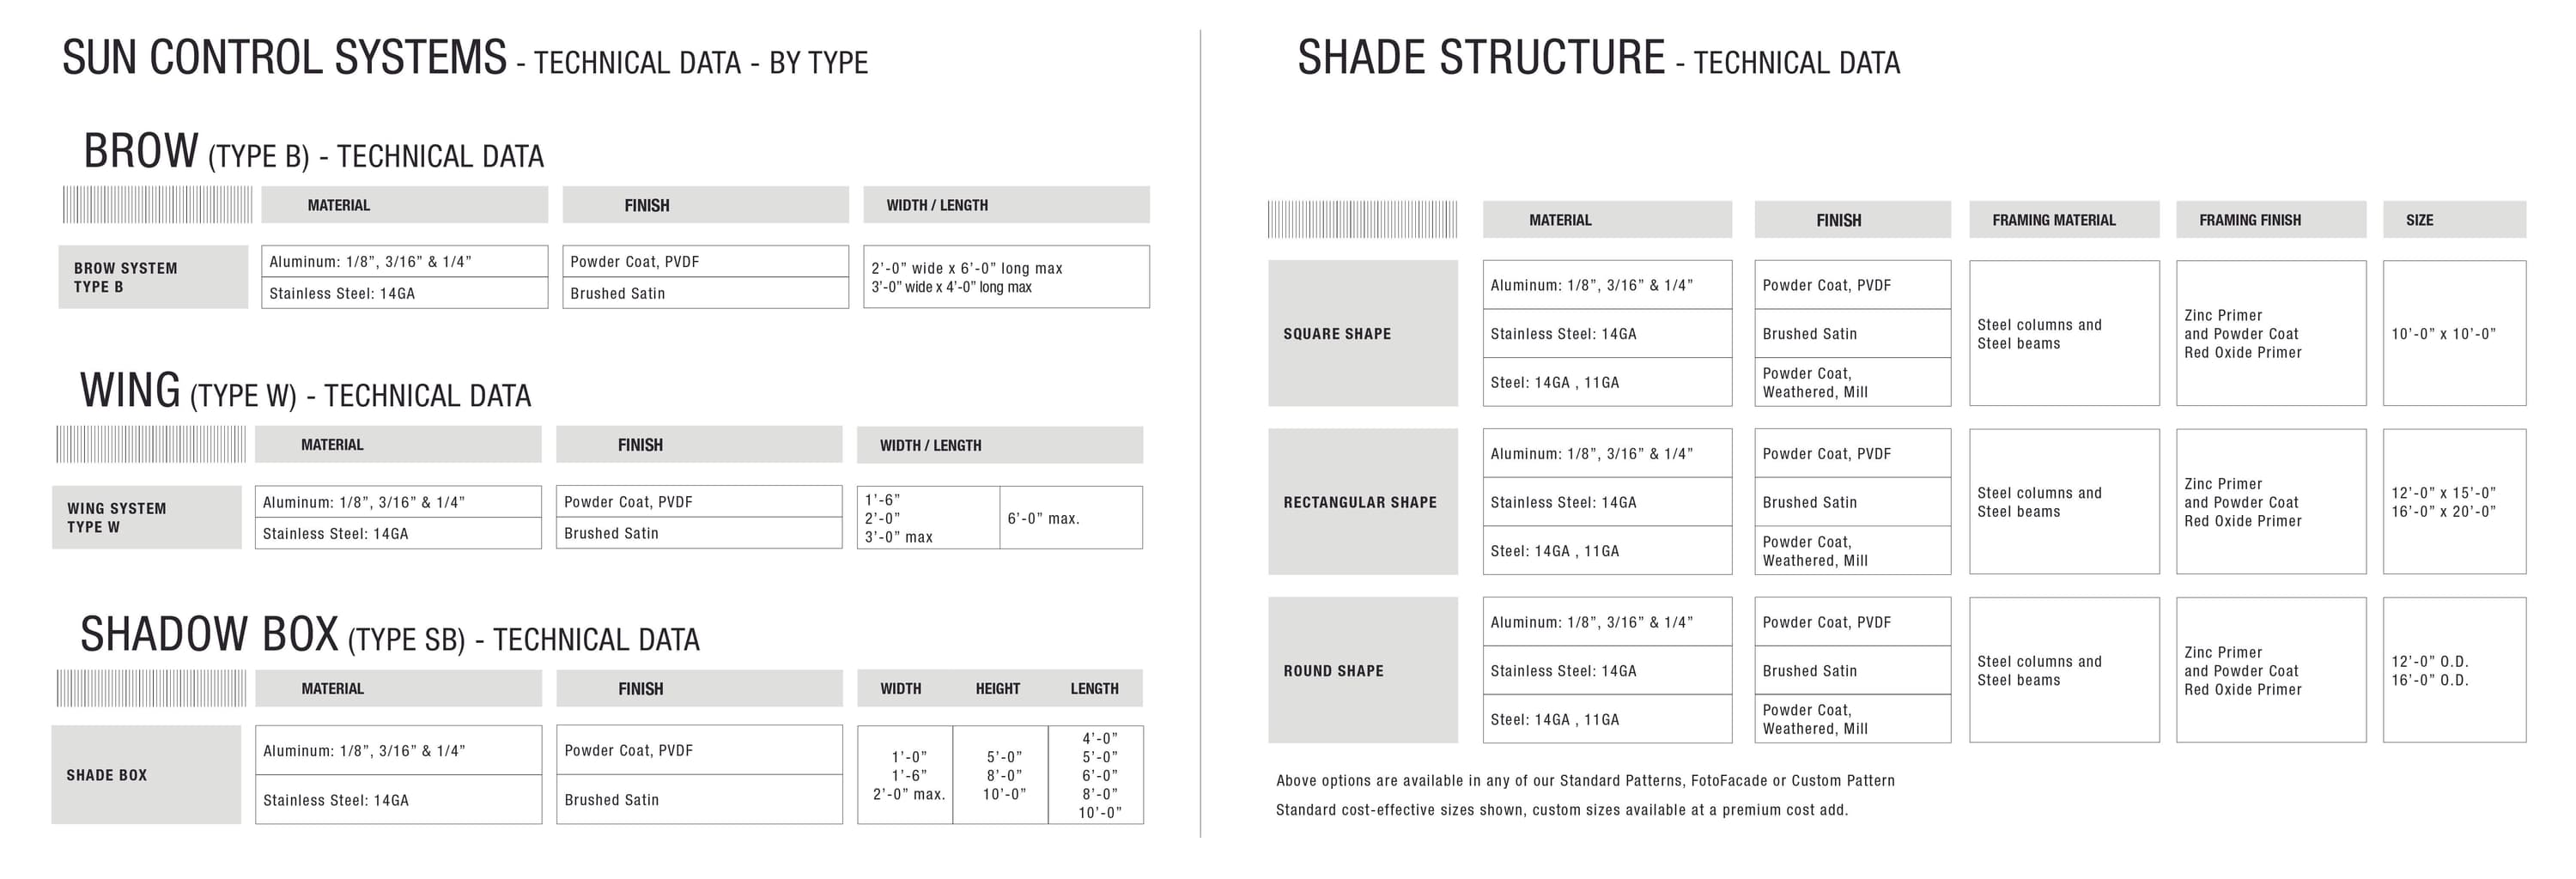 METALSPACES SUN CONTROL SYSTEMS SHADE STRUCTURE PRODUCT DATA TABLE
